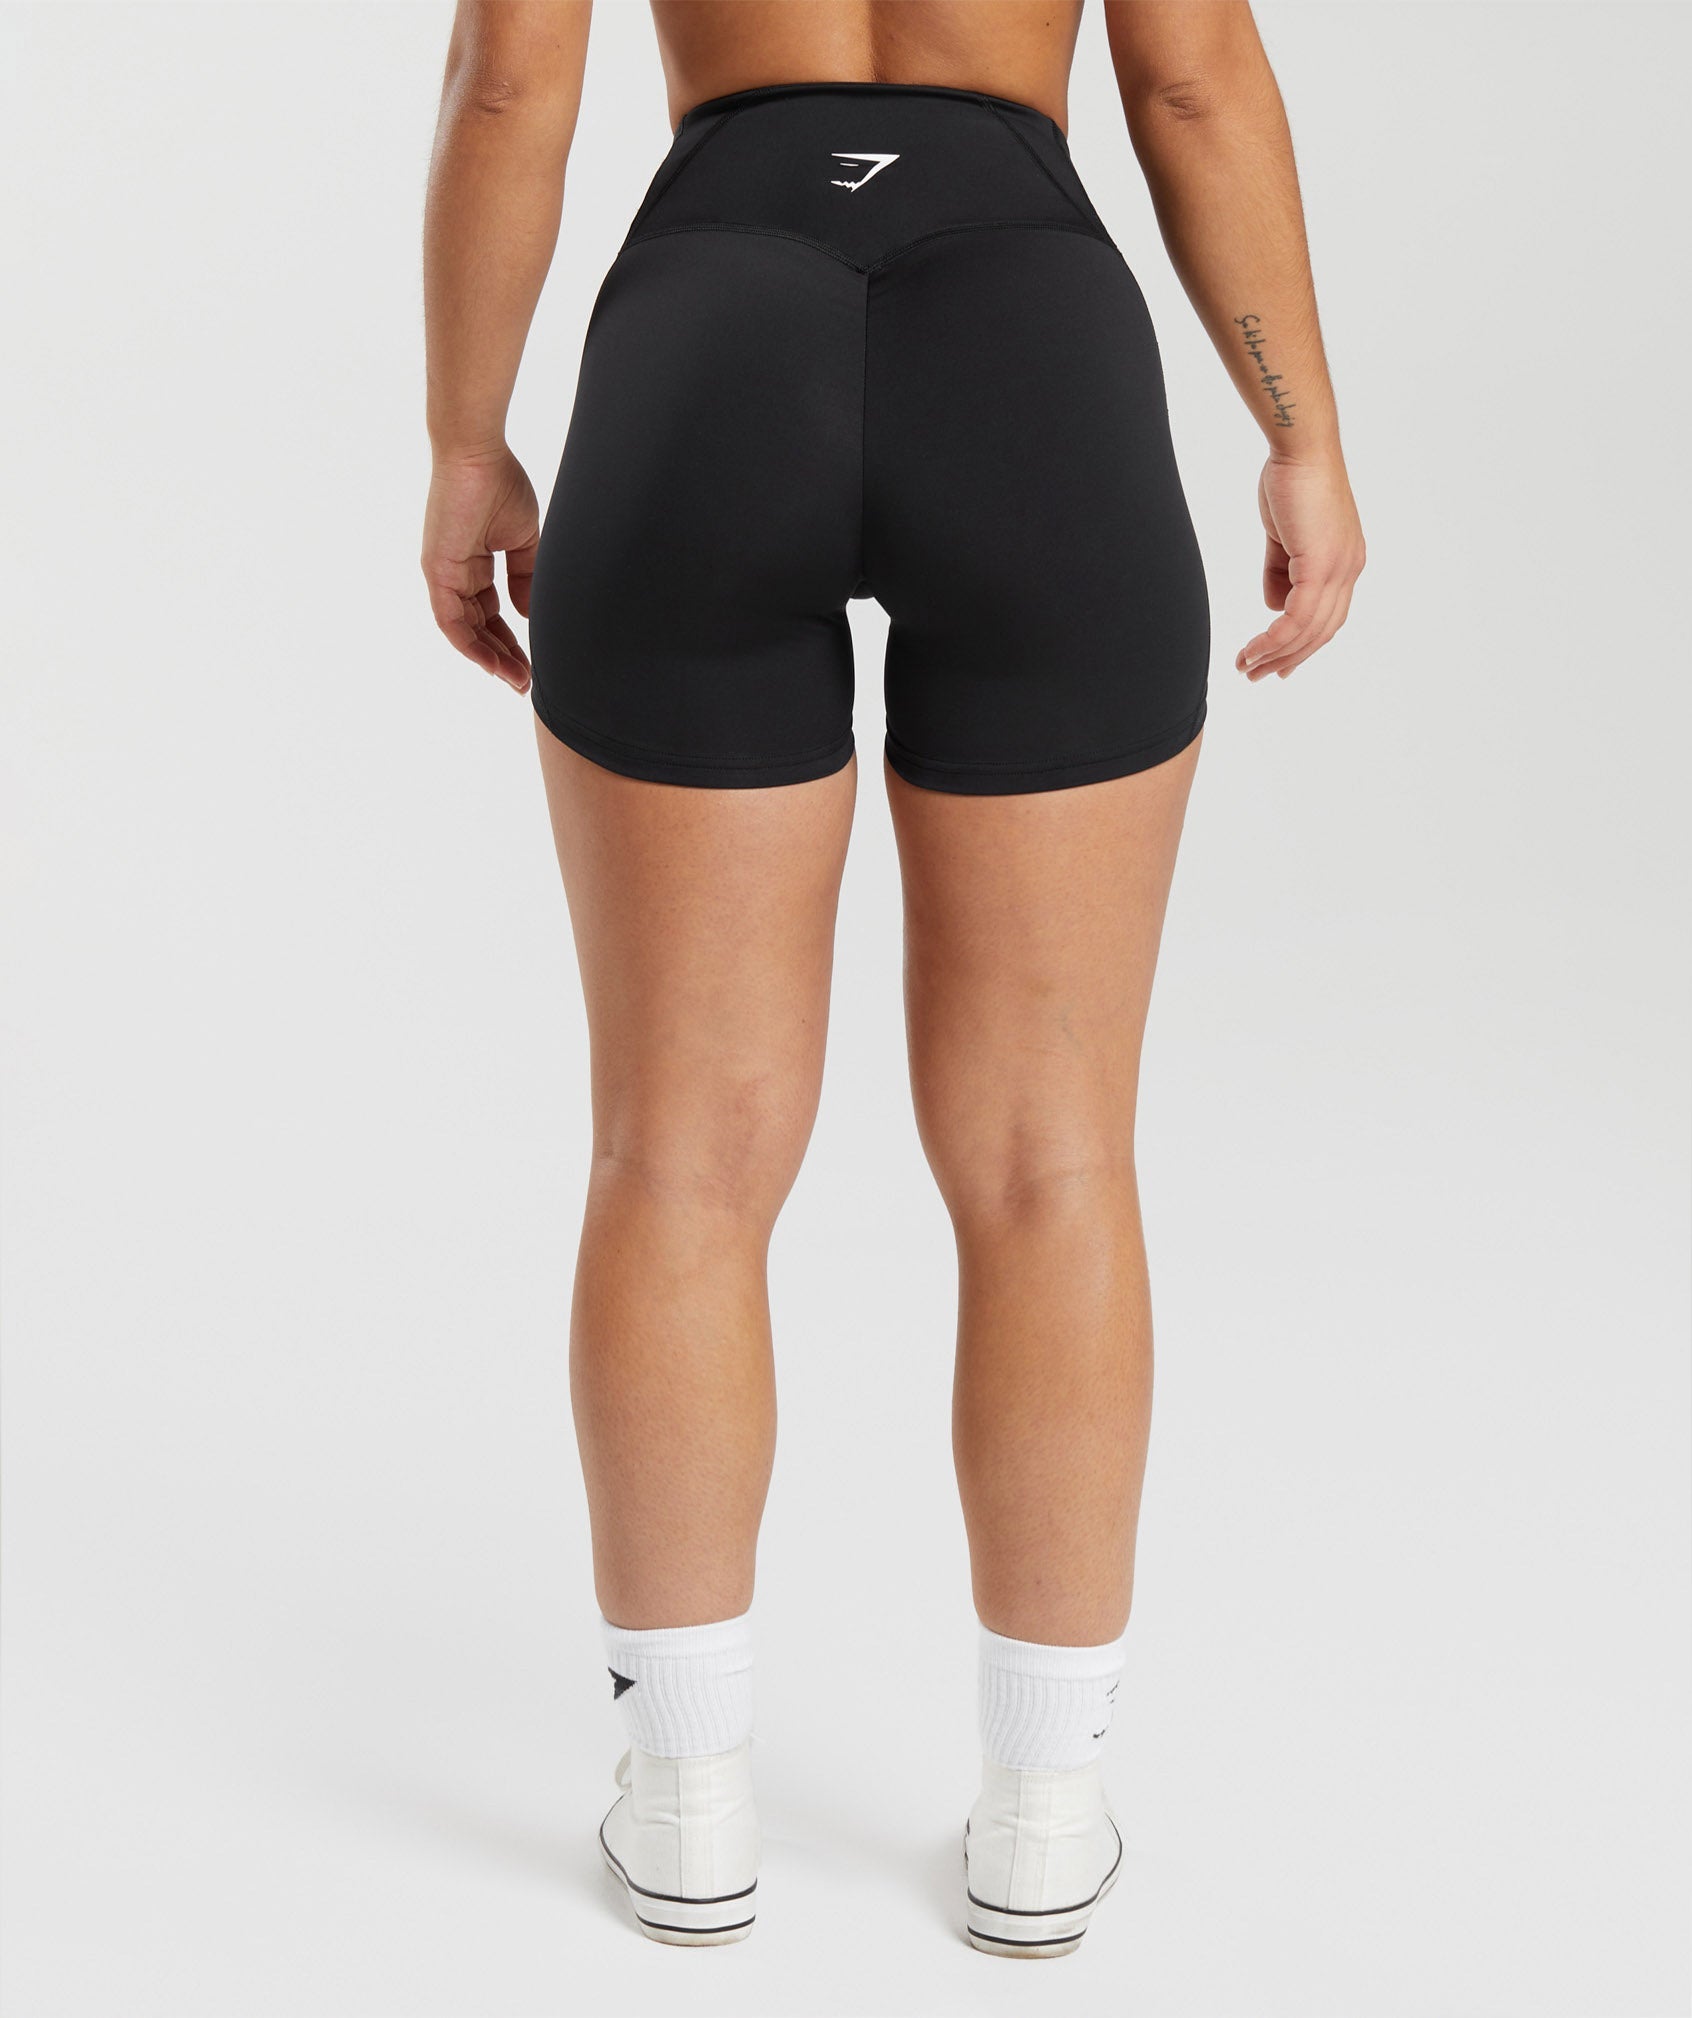 GS Power High Rise Shorts in Black - view 3